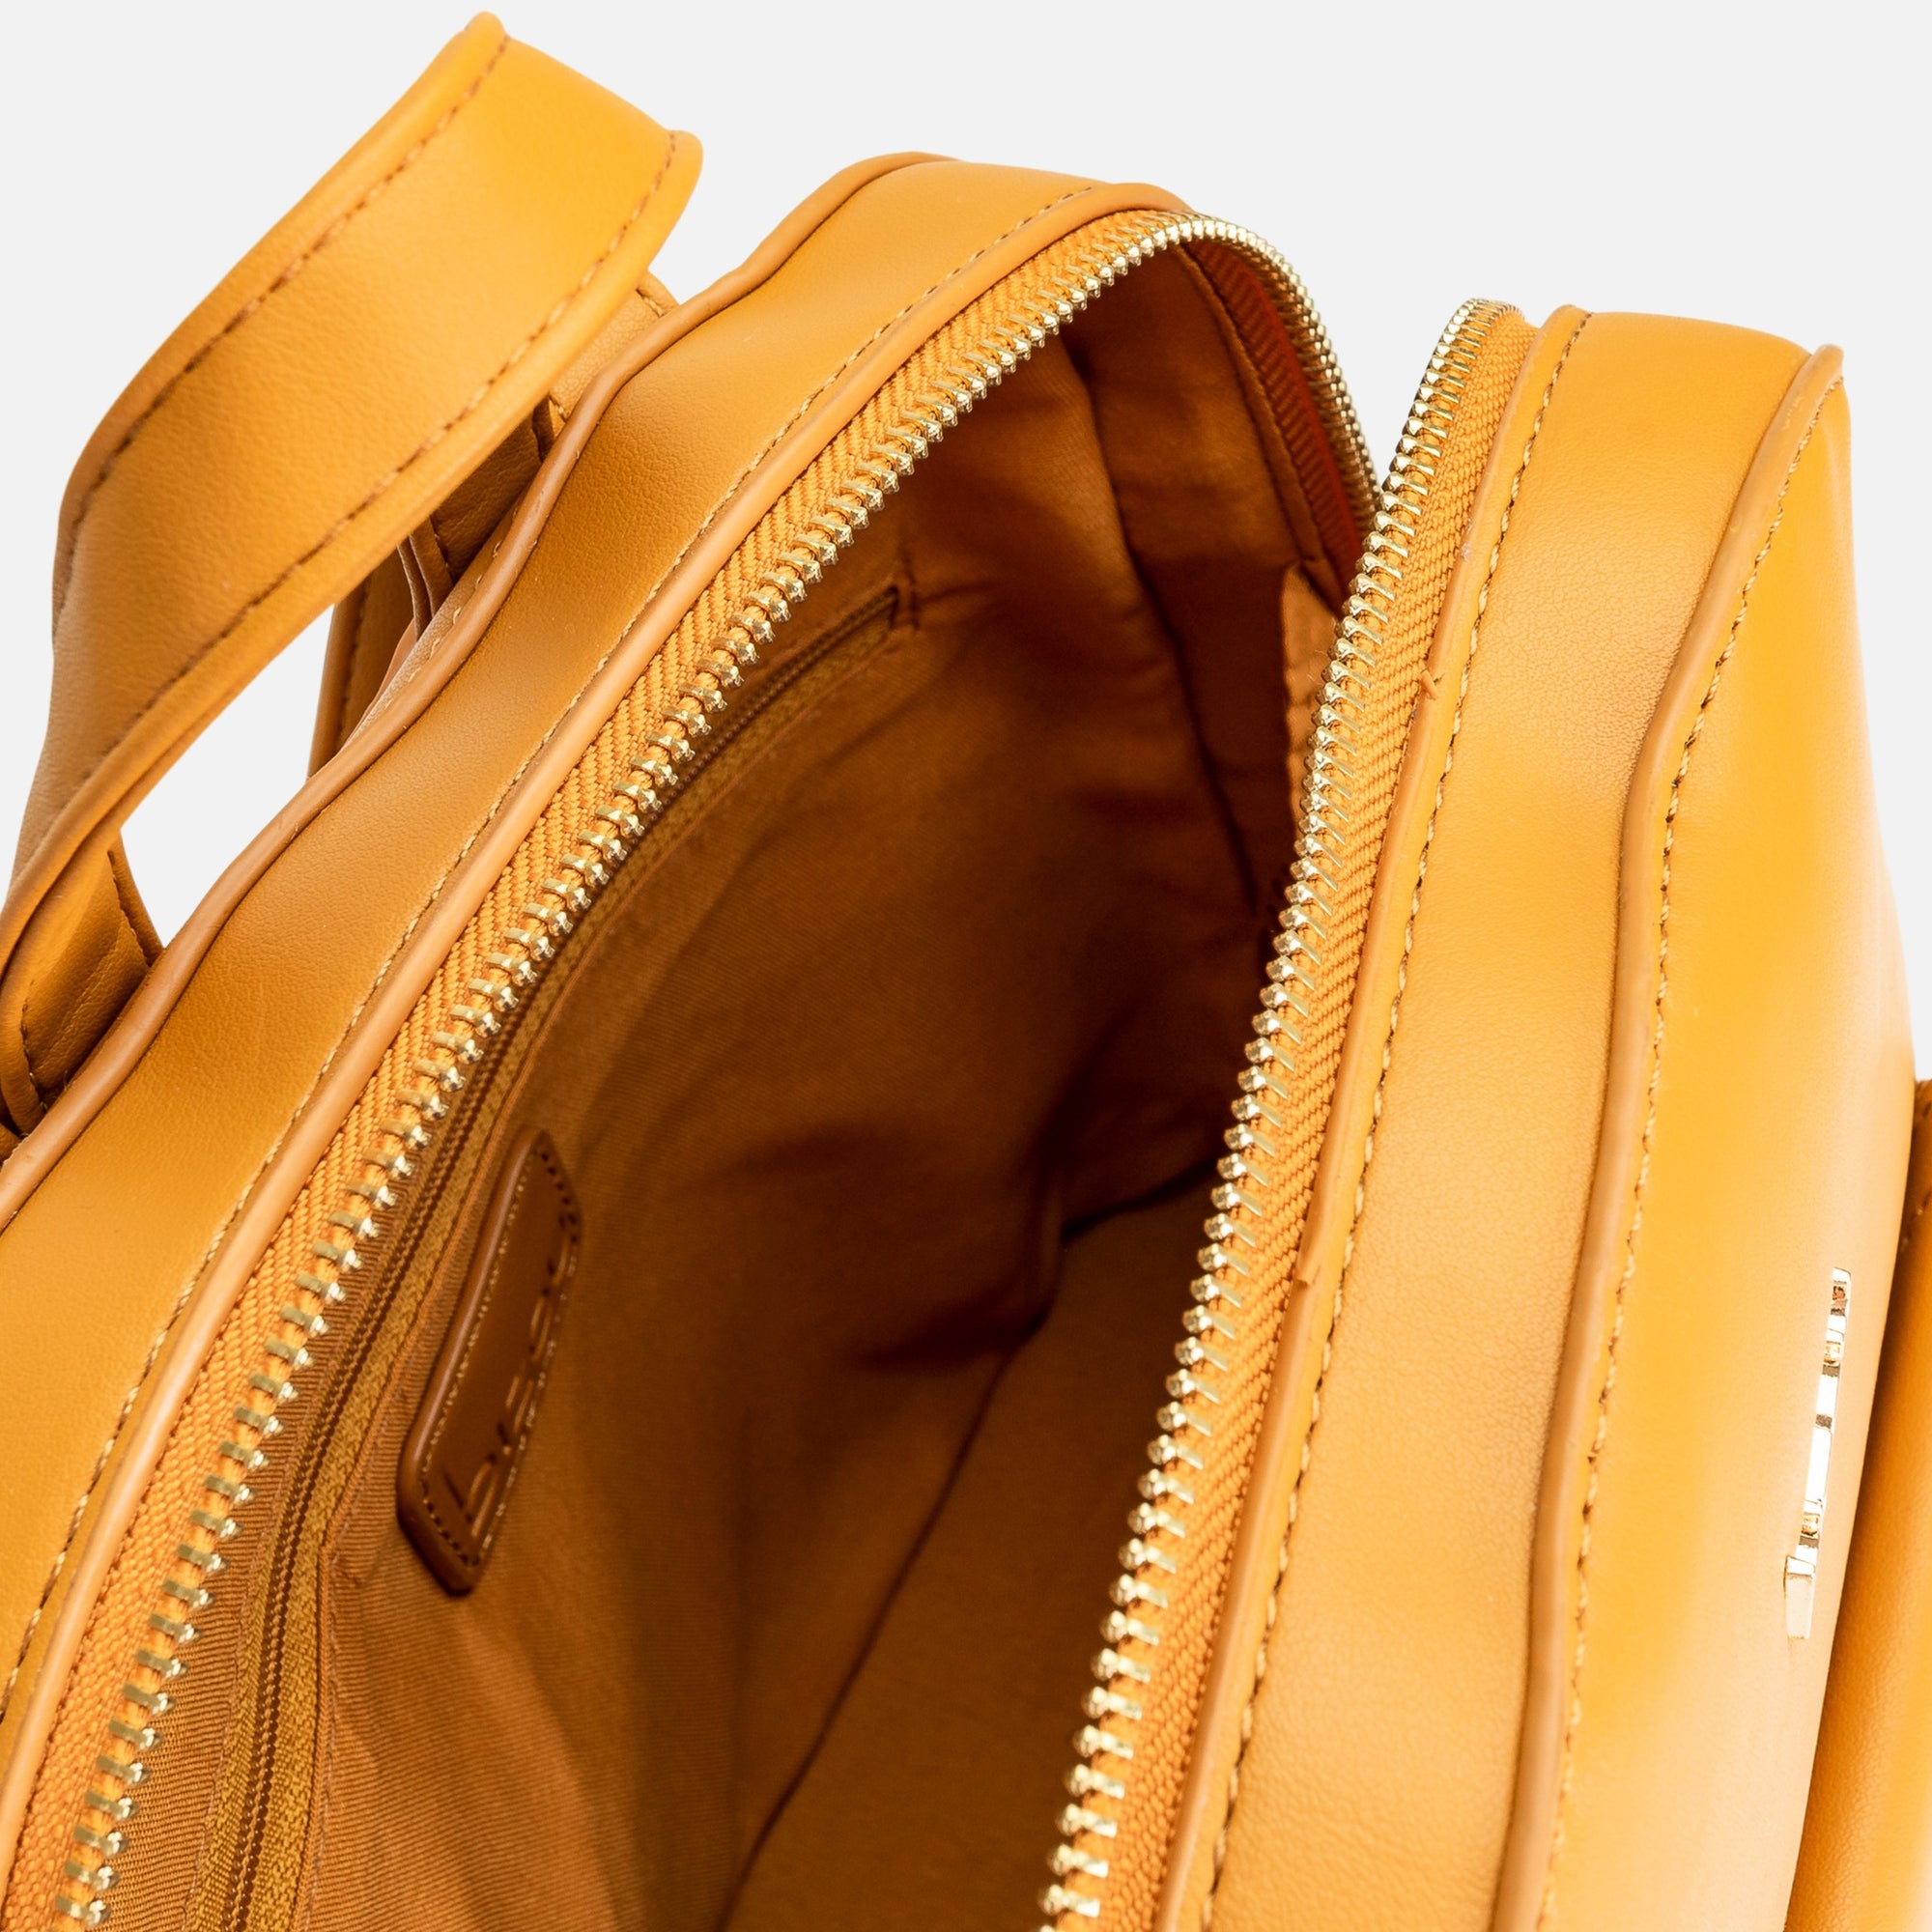 Ochre yellow backpack with front pocket